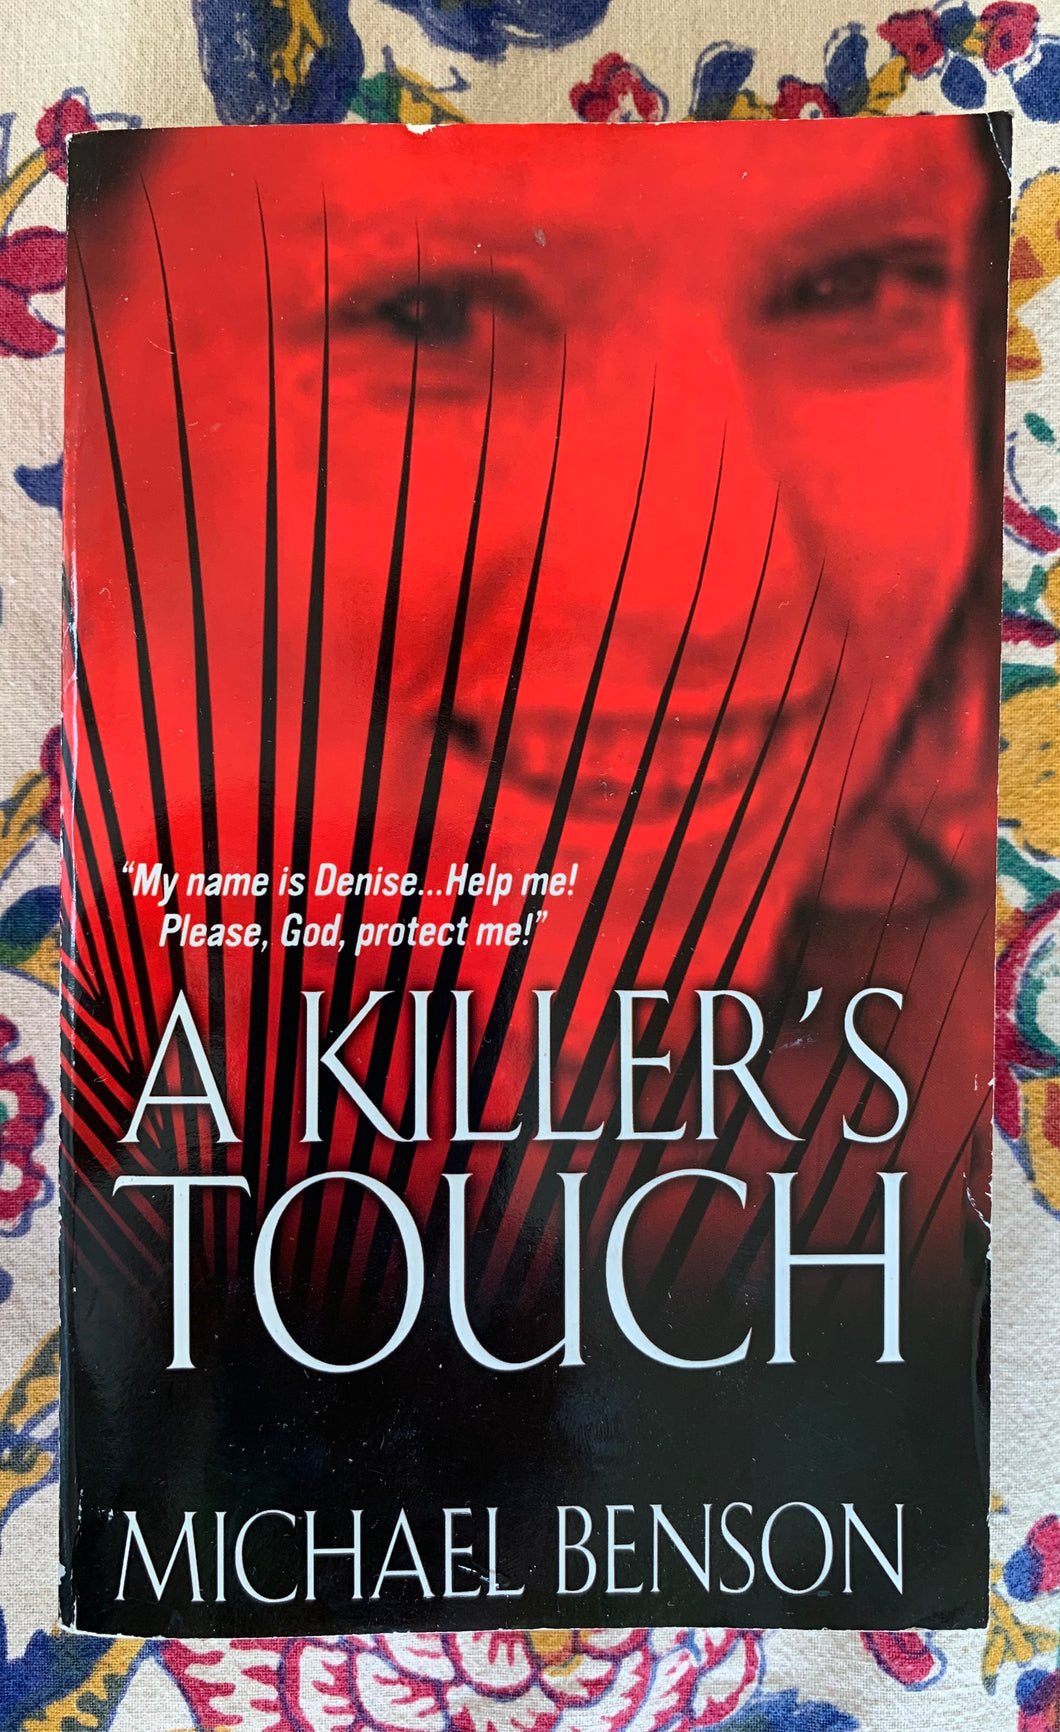 A Killer's Touch